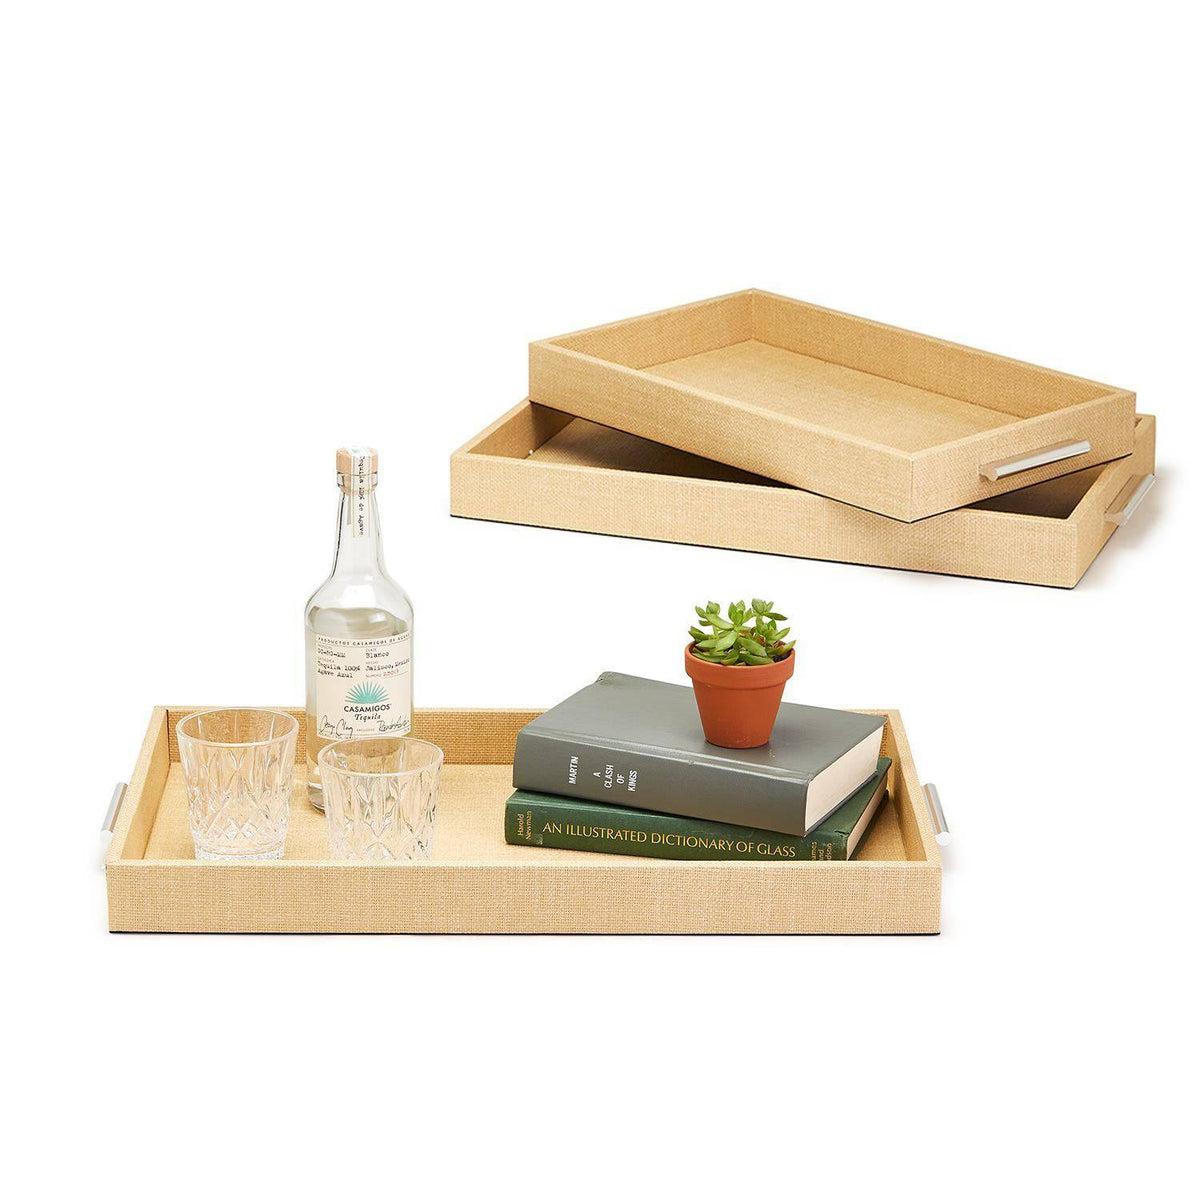 Terra Cane Gallery Trays - 3 sizes available - The Preppy Bunny